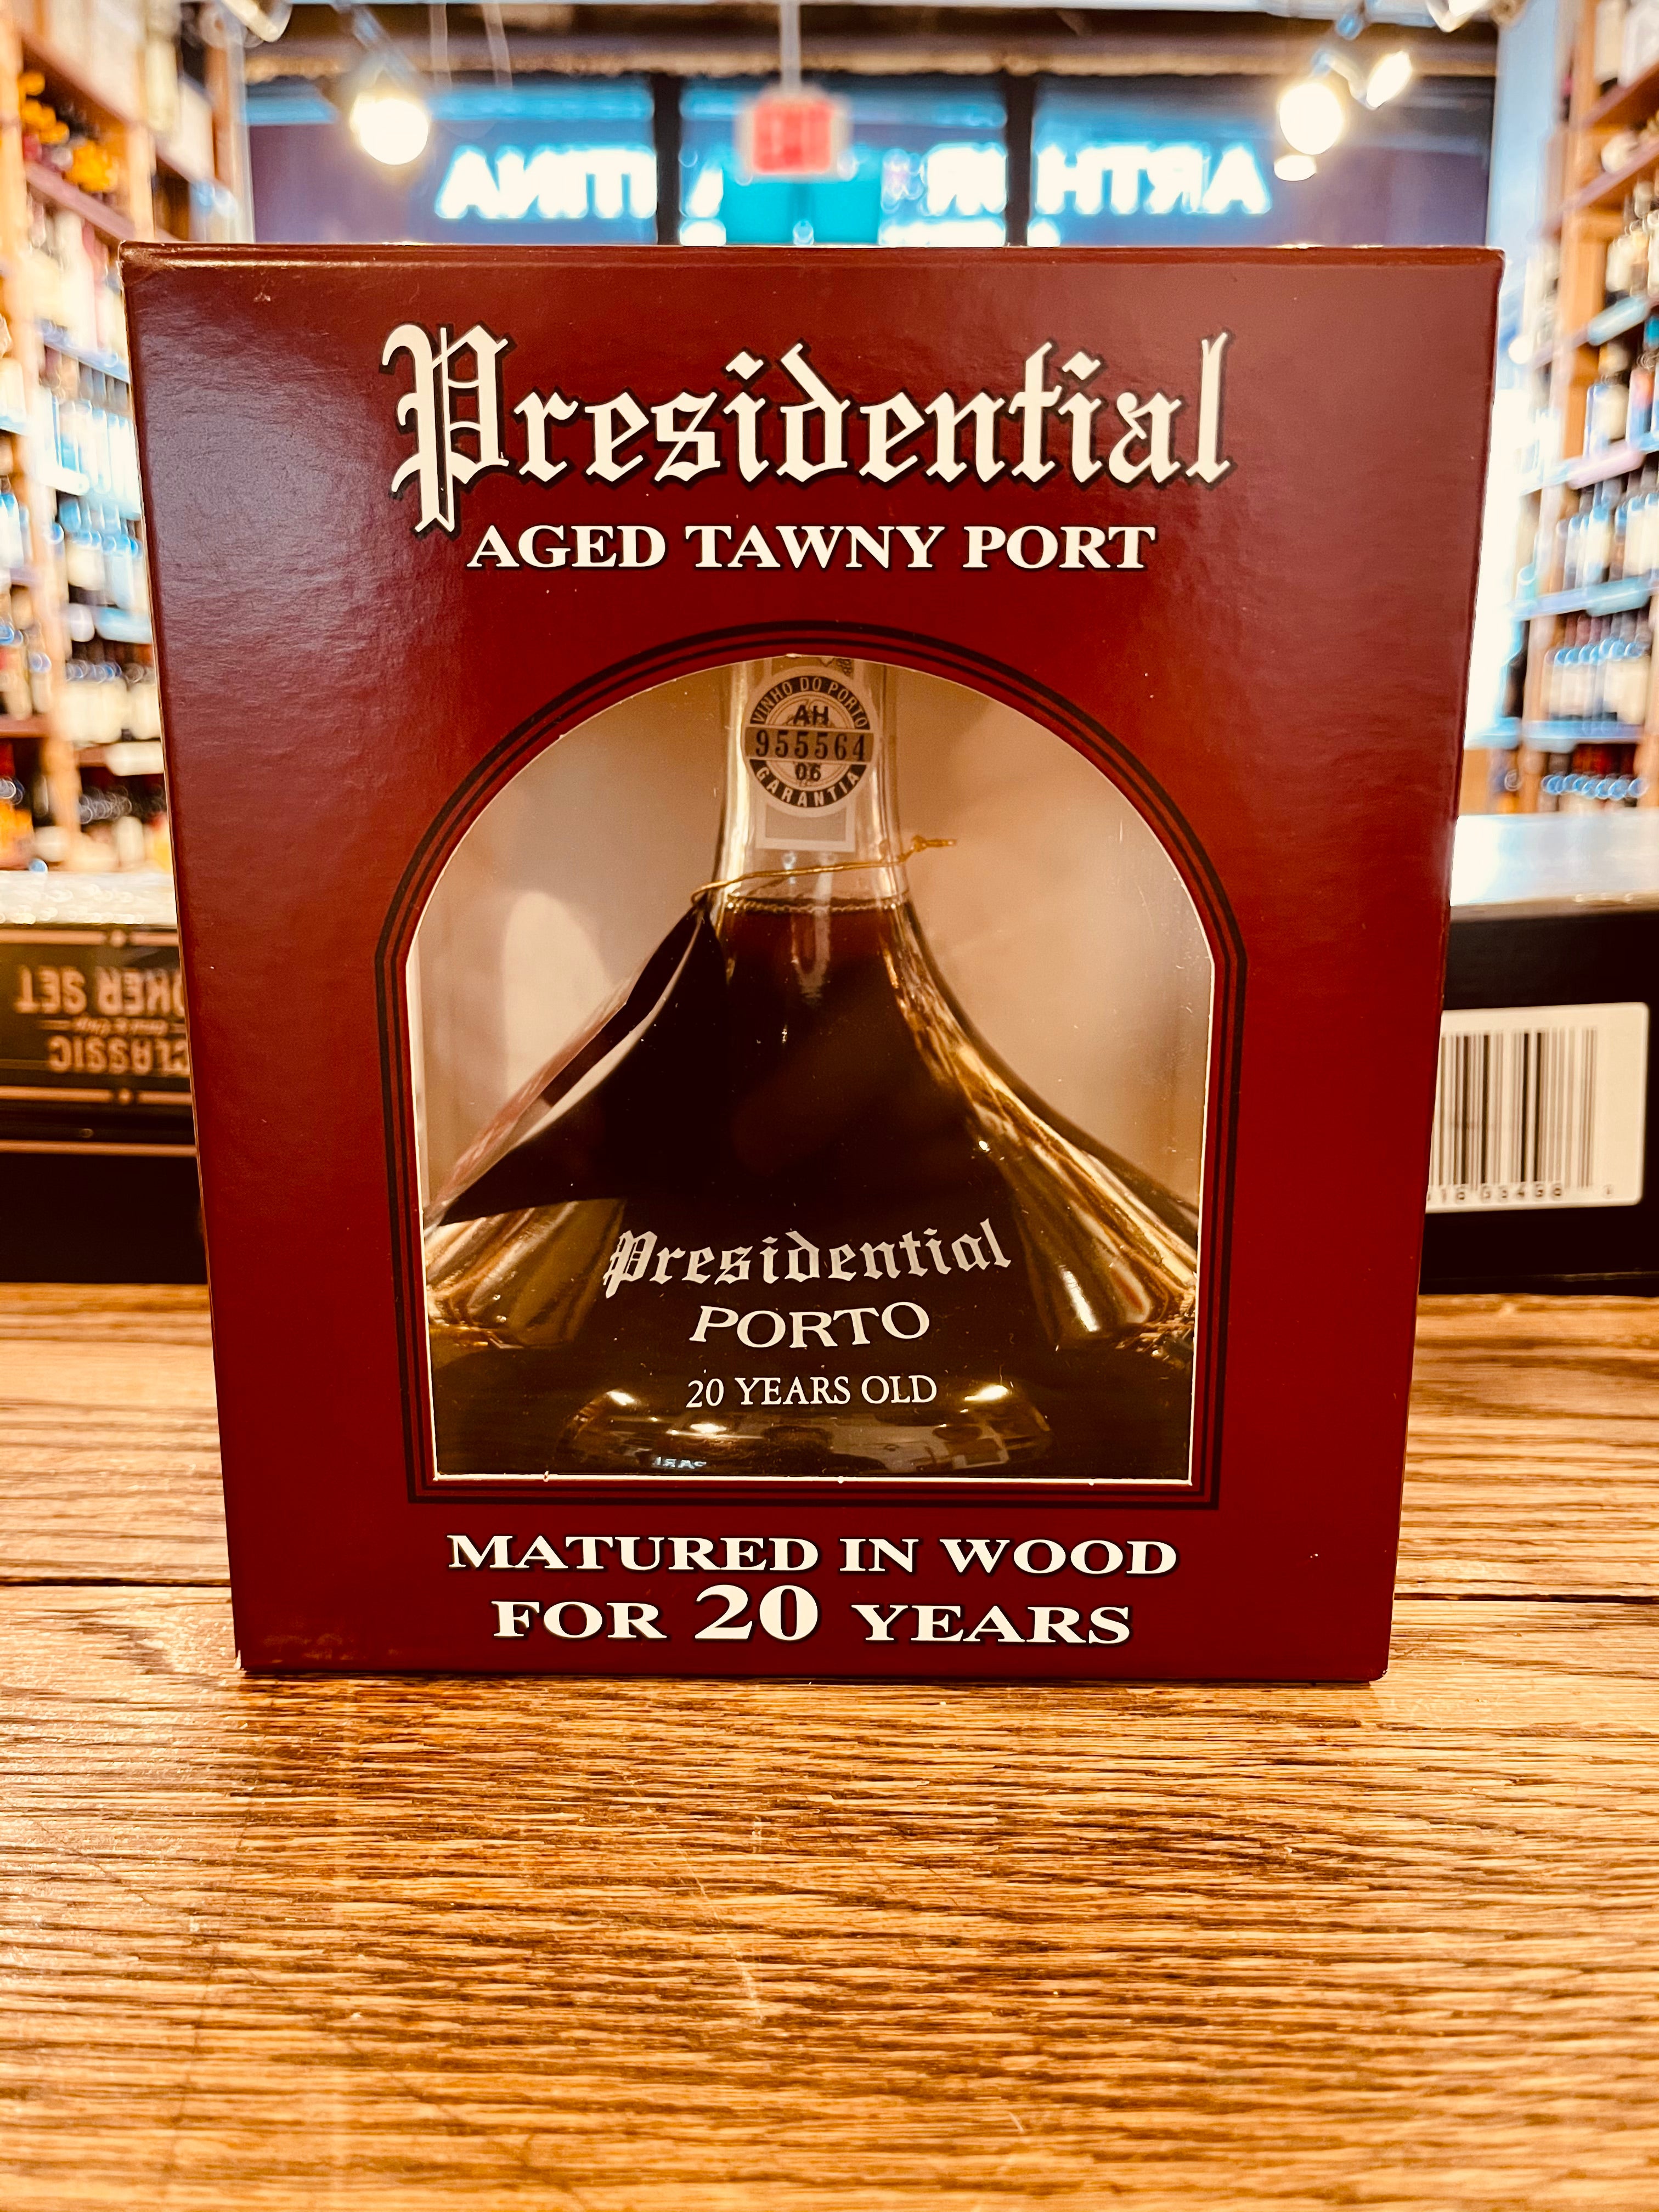 Presidential Porto Tawny 20yr 750ml Ship a decanter shaped glass bottle inside of a maroon square box with white lettering